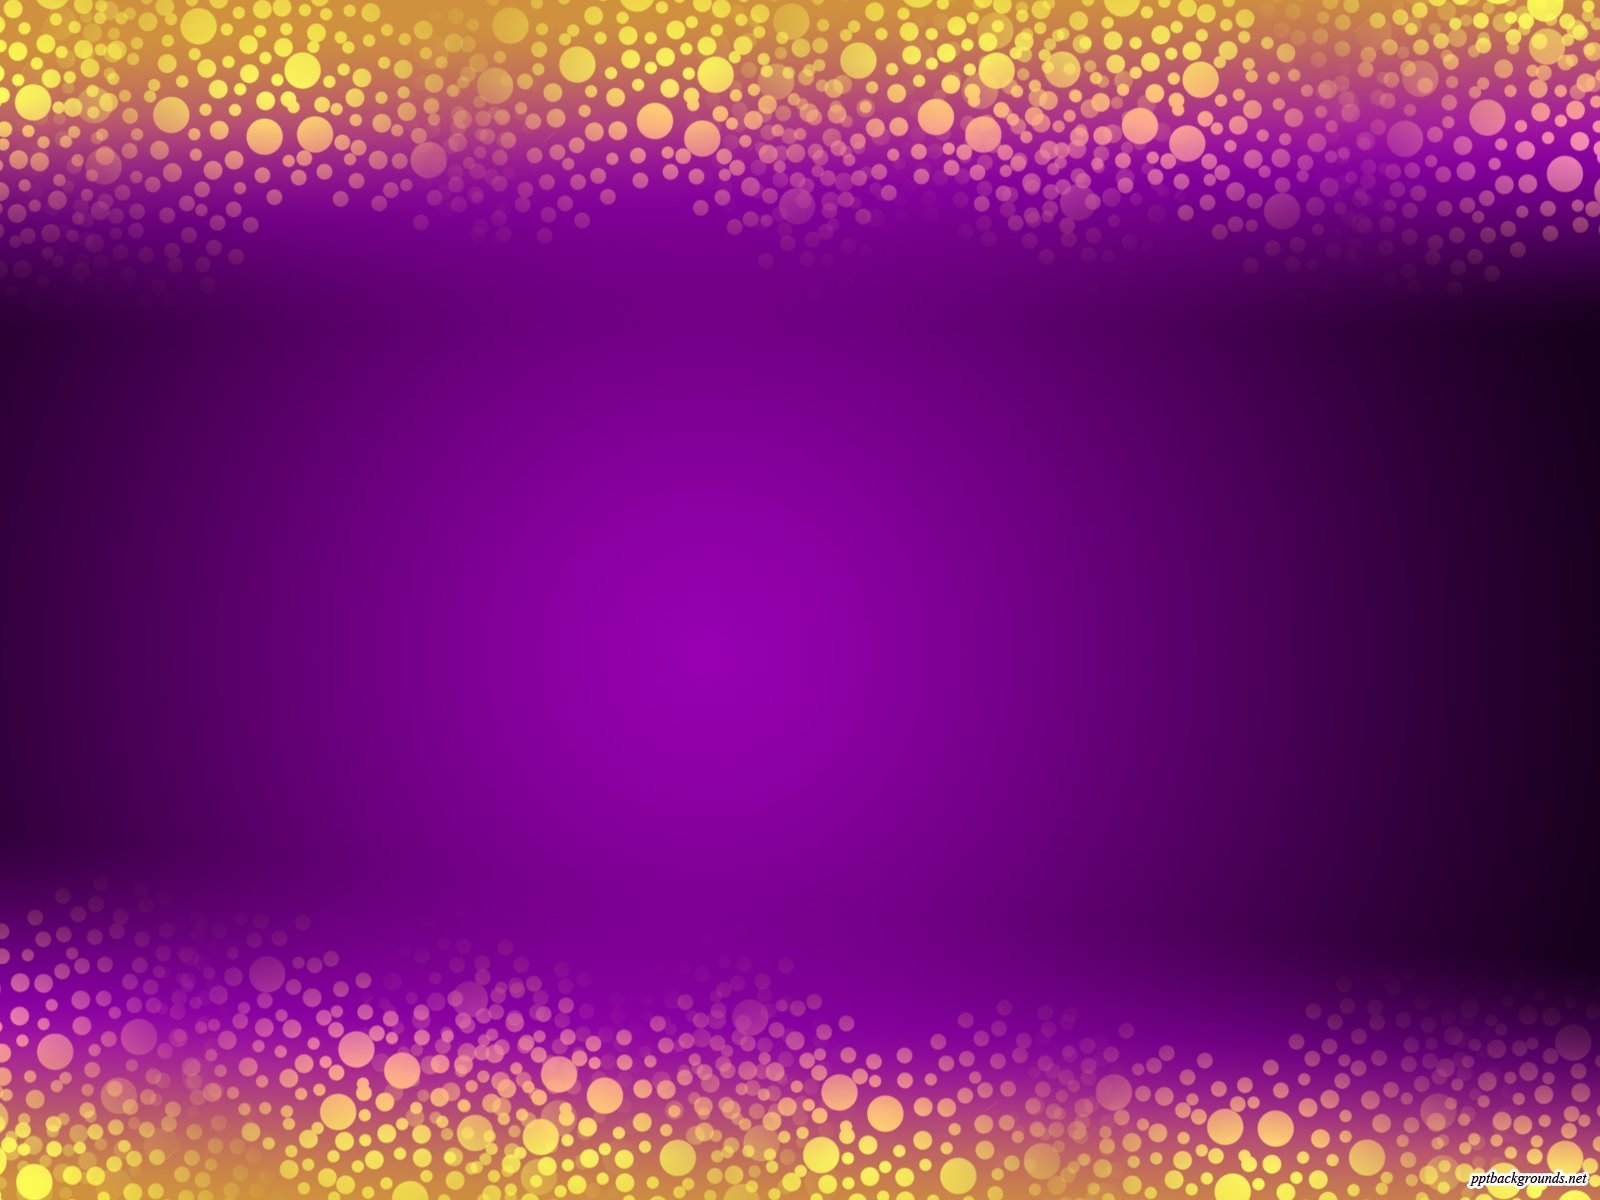 Free Purple And Gold Luxury Vector Backgrounds For PowerPoint   Border 1600x1200